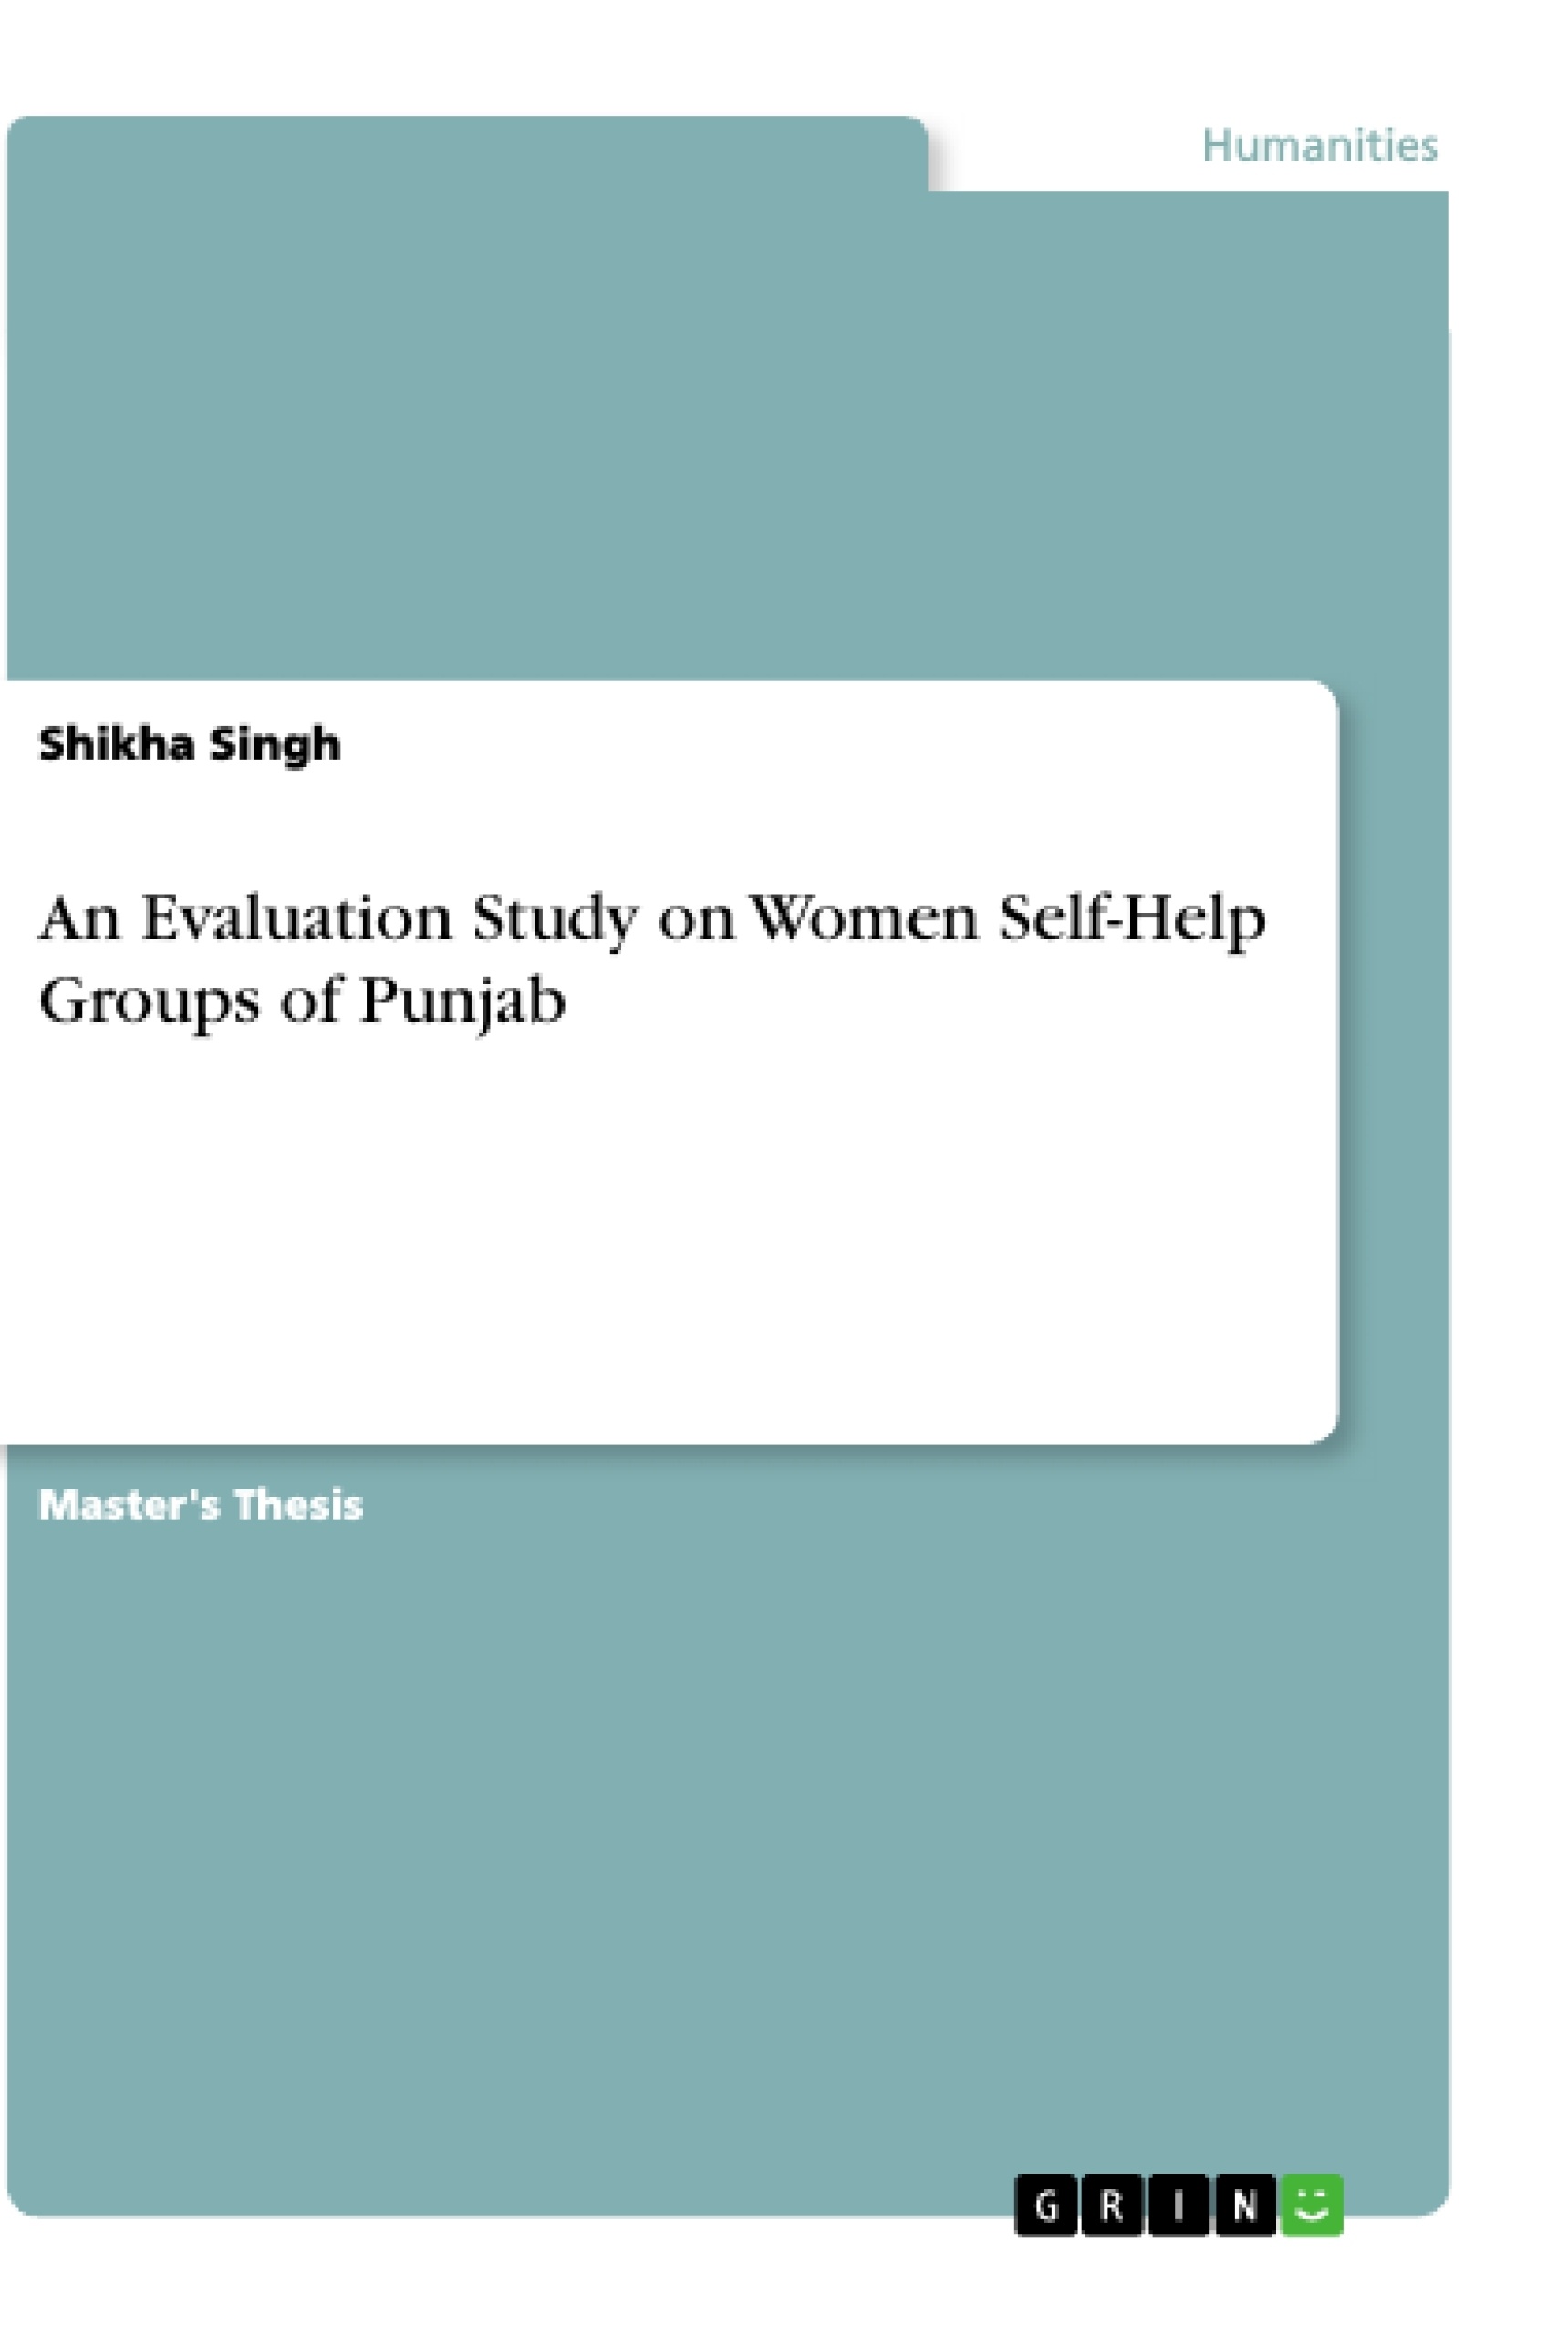 Titre: An Evaluation Study on Women Self-Help Groups of Punjab